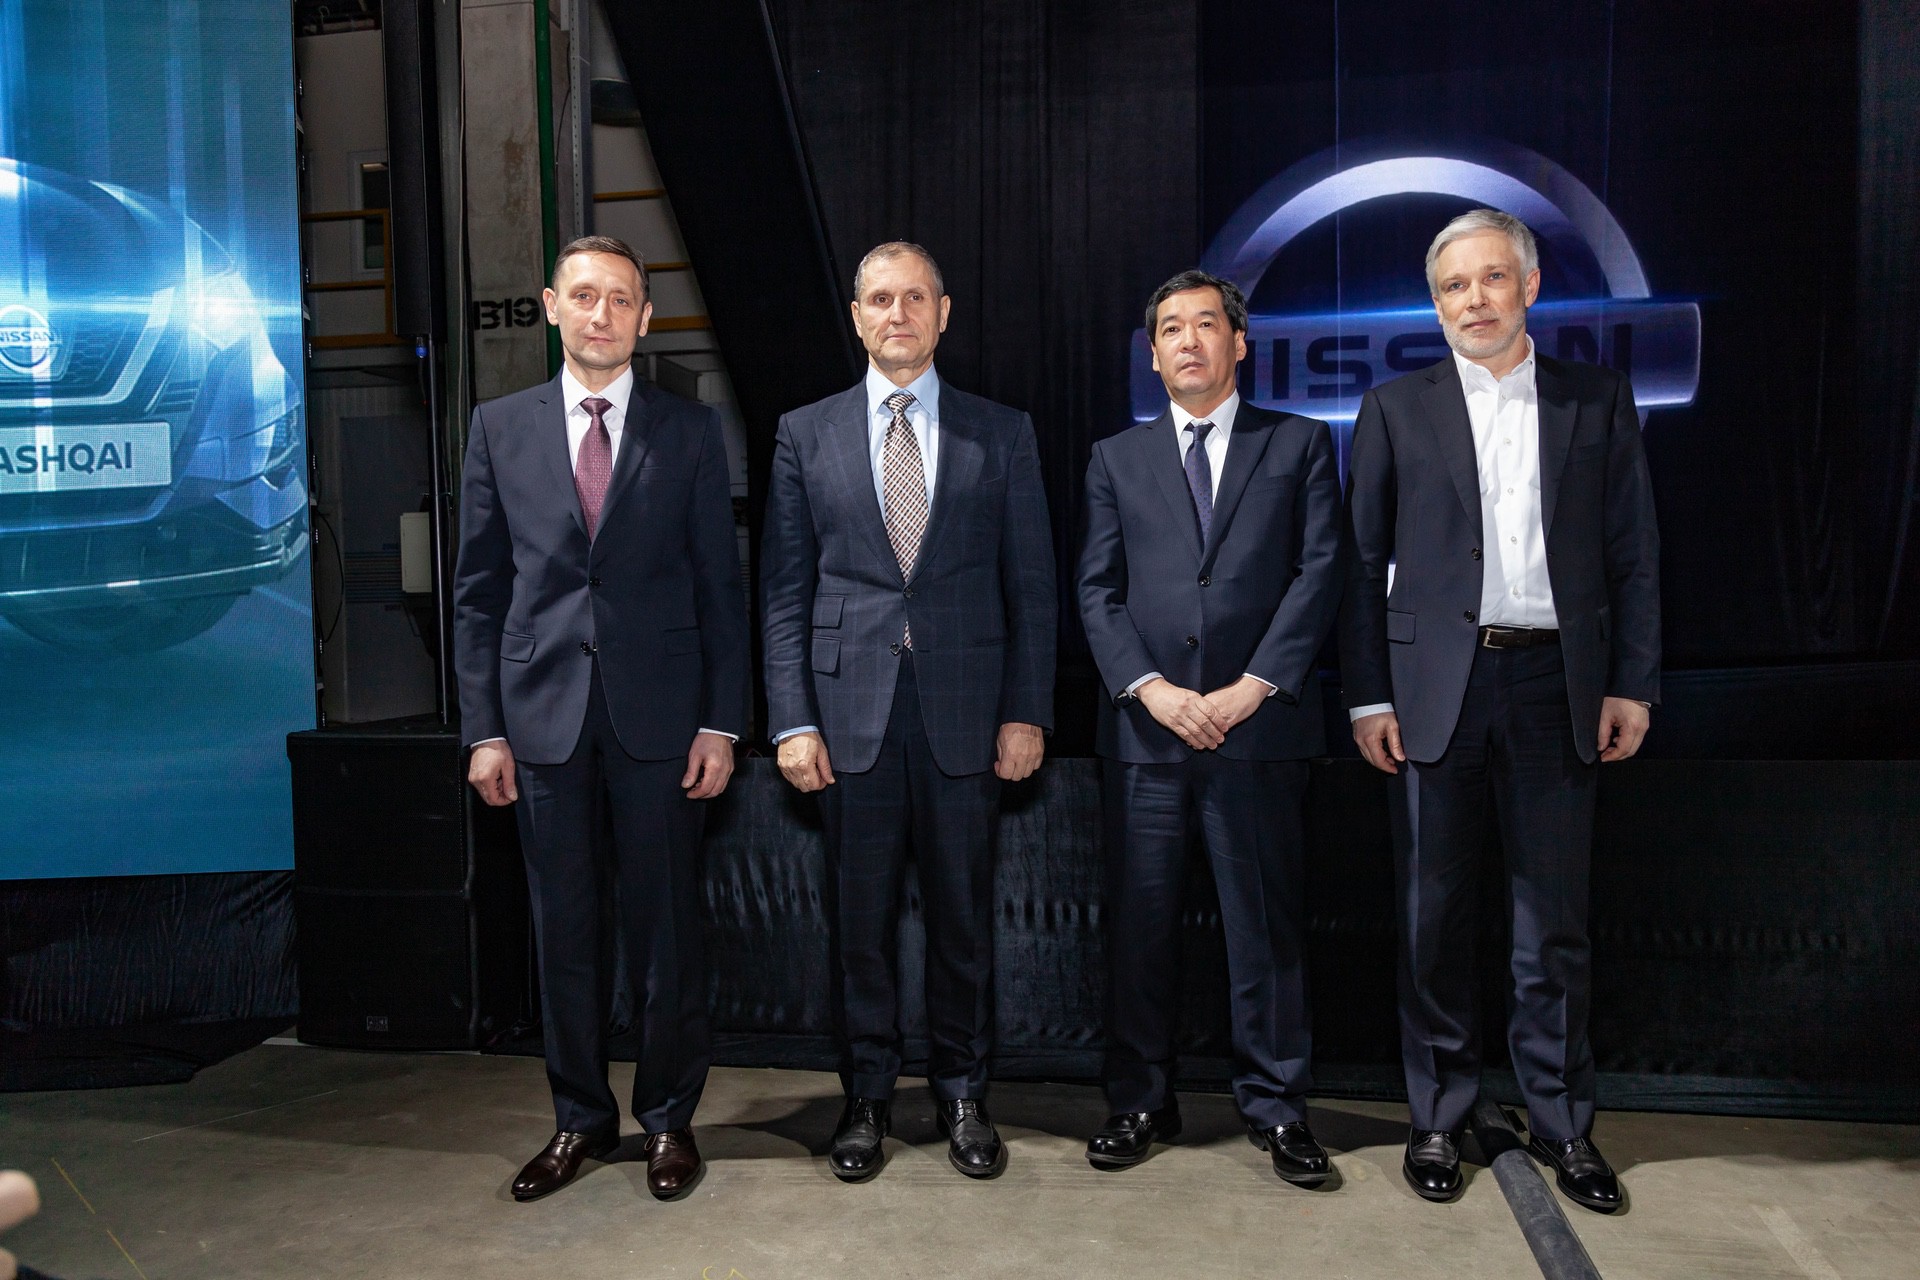 Latest vehicle technology launches in Russia as production of ne